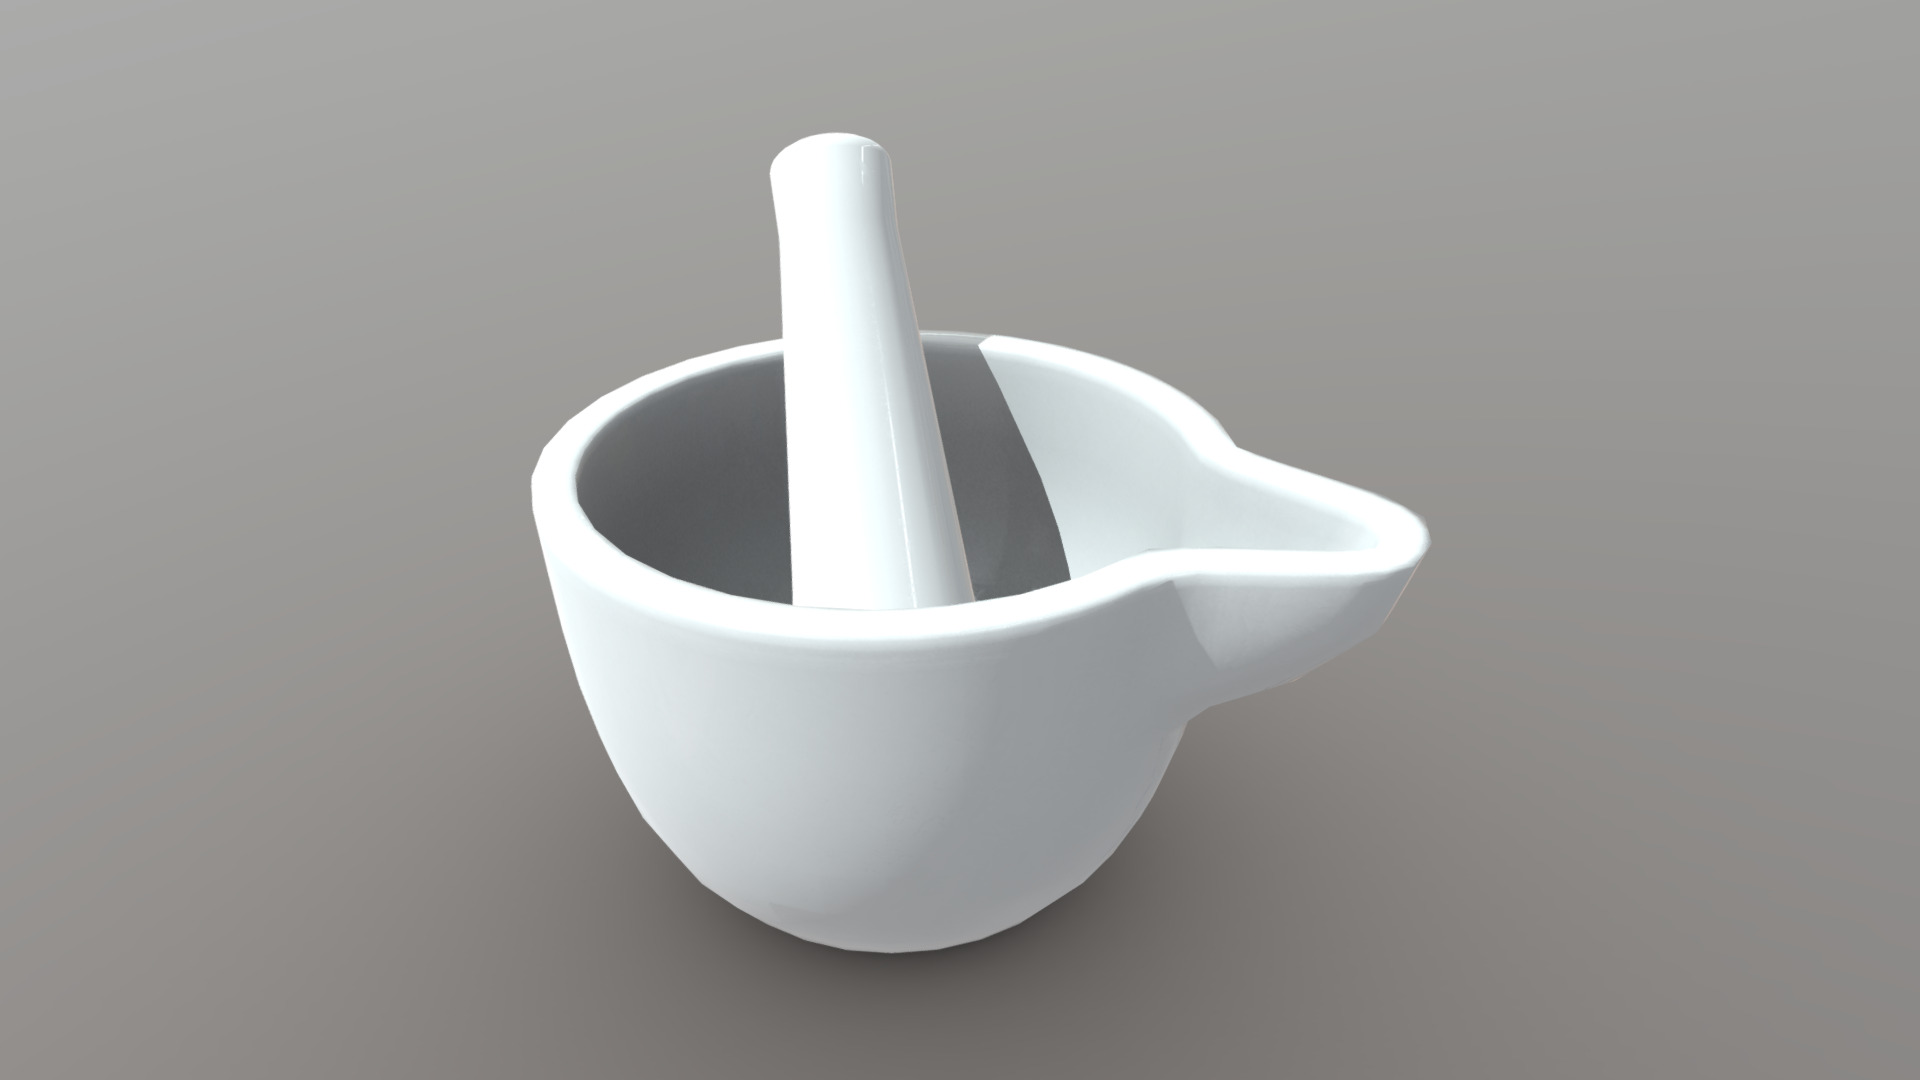 3D model Mortar and Pestle 2 - This is a 3D model of the Mortar and Pestle 2. The 3D model is about a white bowl with a handle.